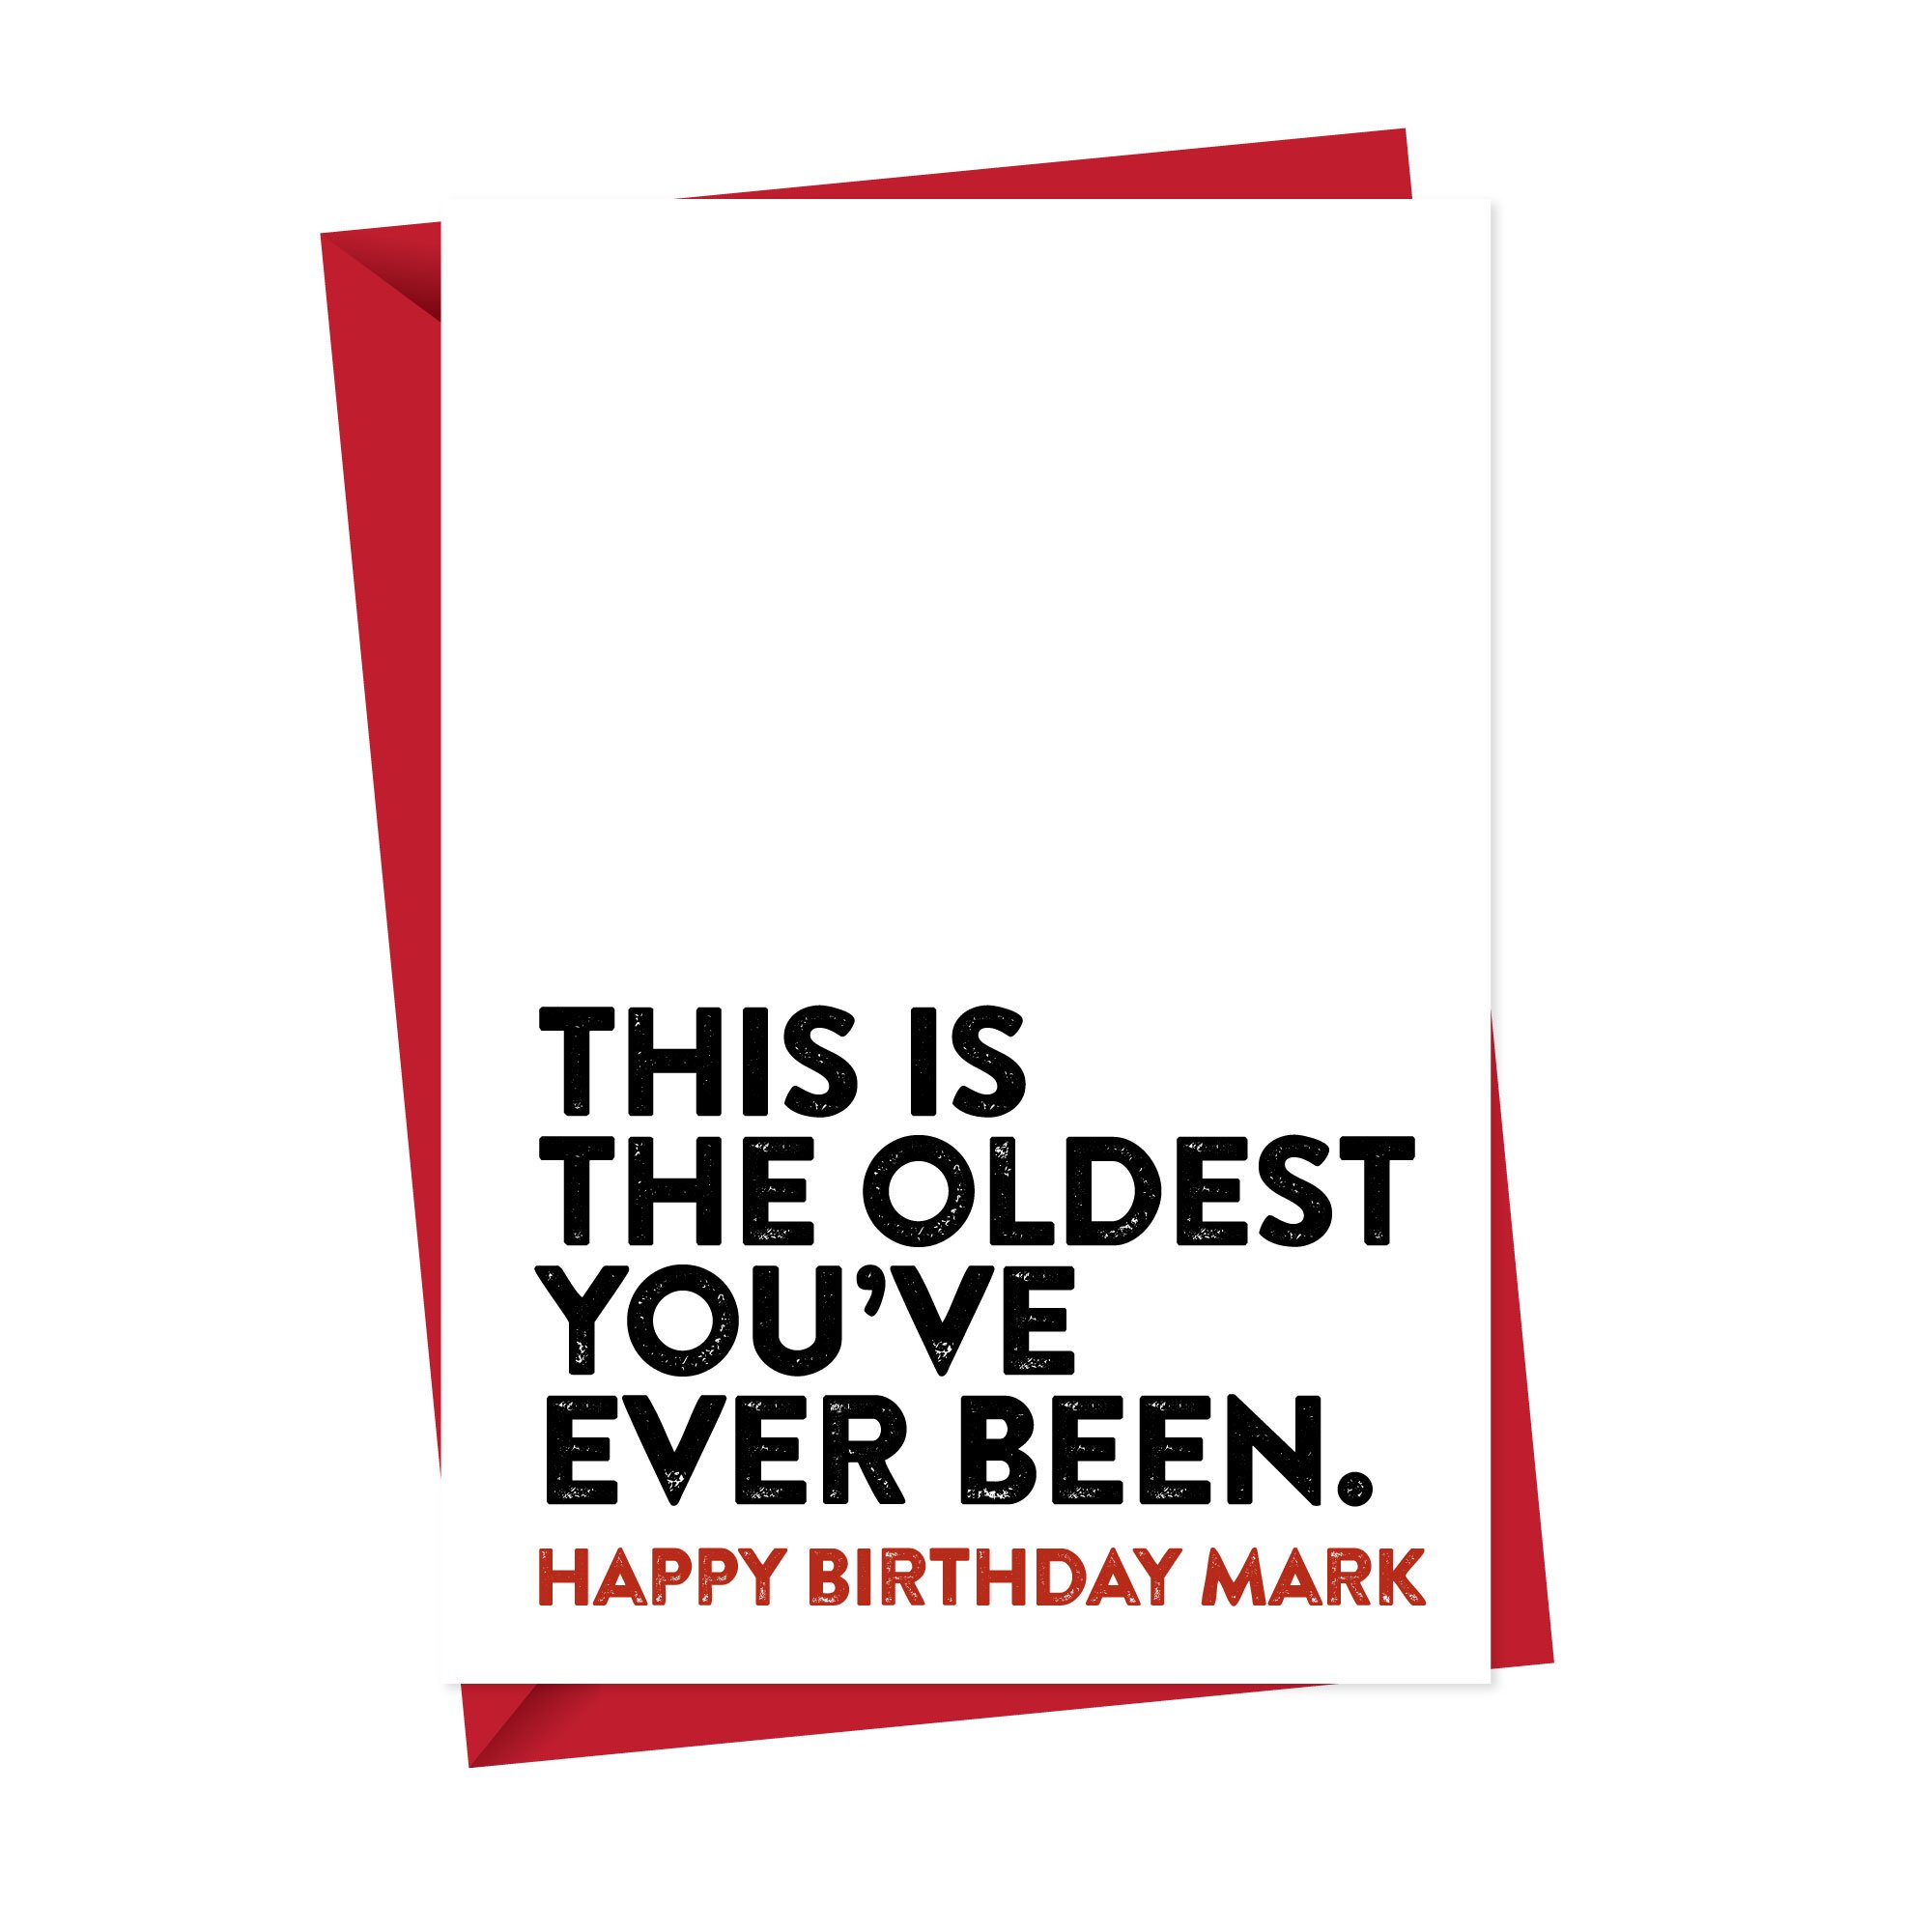 This is the oldest you have ever been